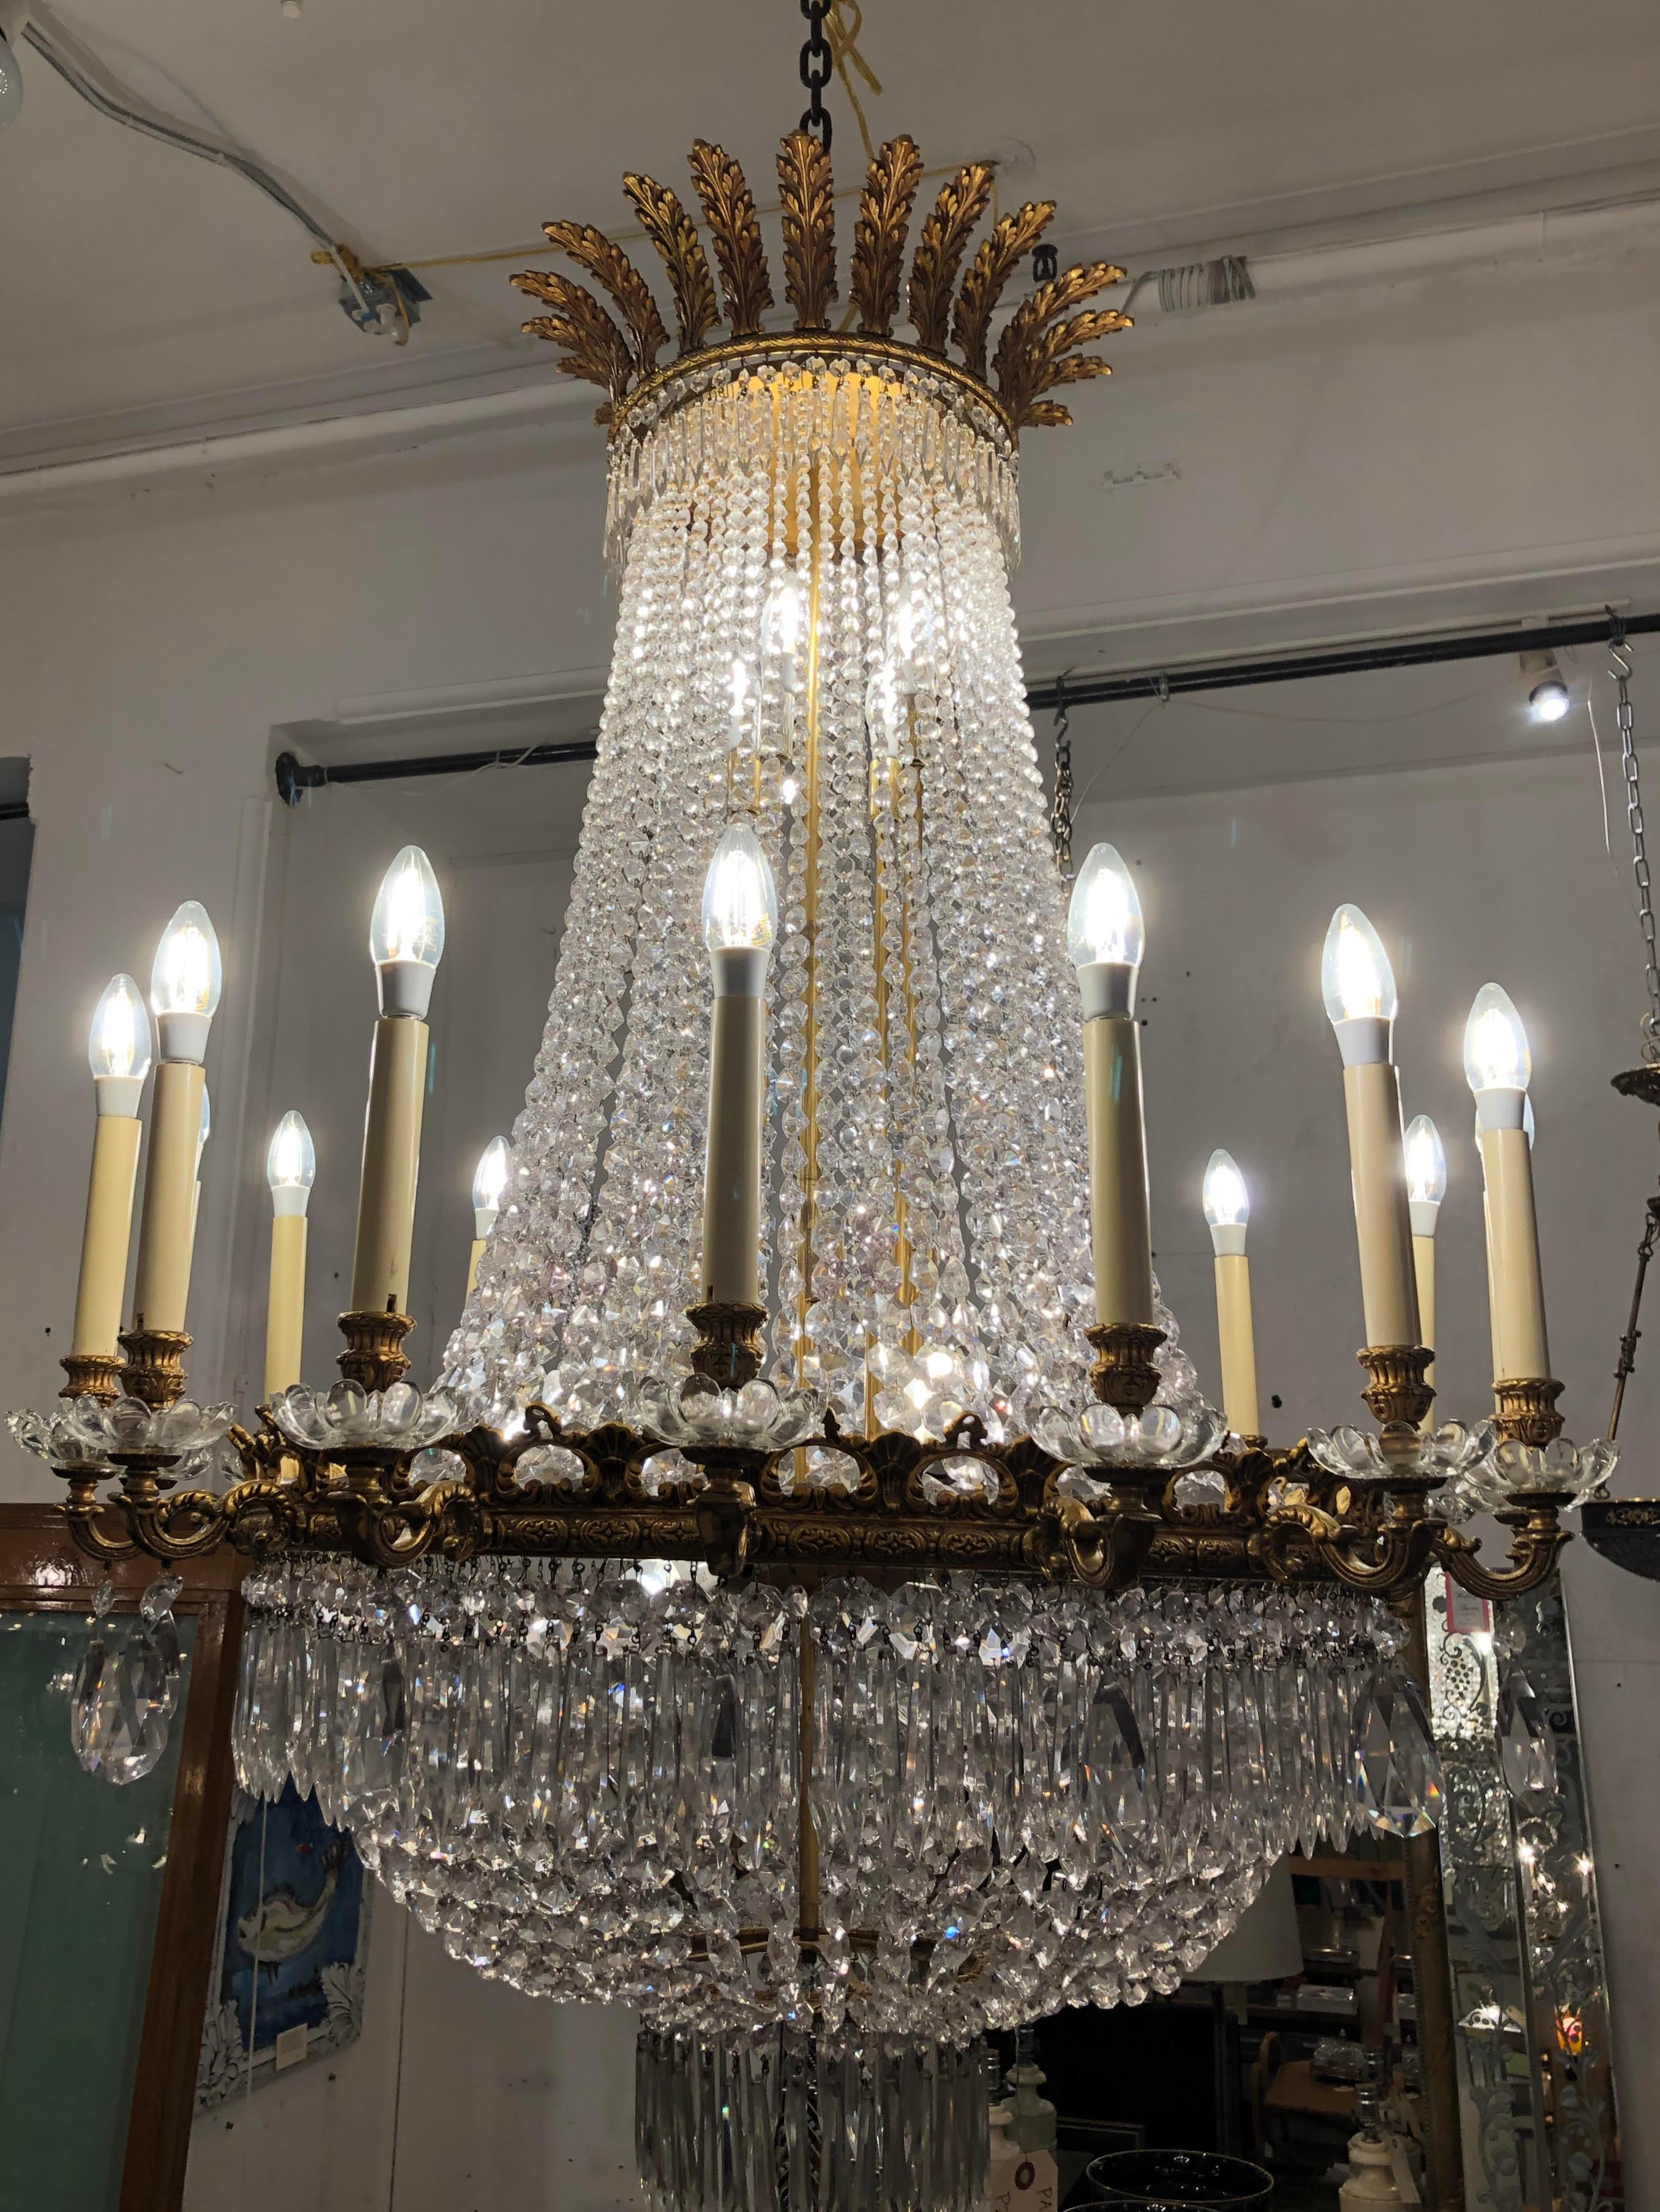 1920s Crystal Bronze Empire Chandelier NYC Palace Hotel Lobby 2